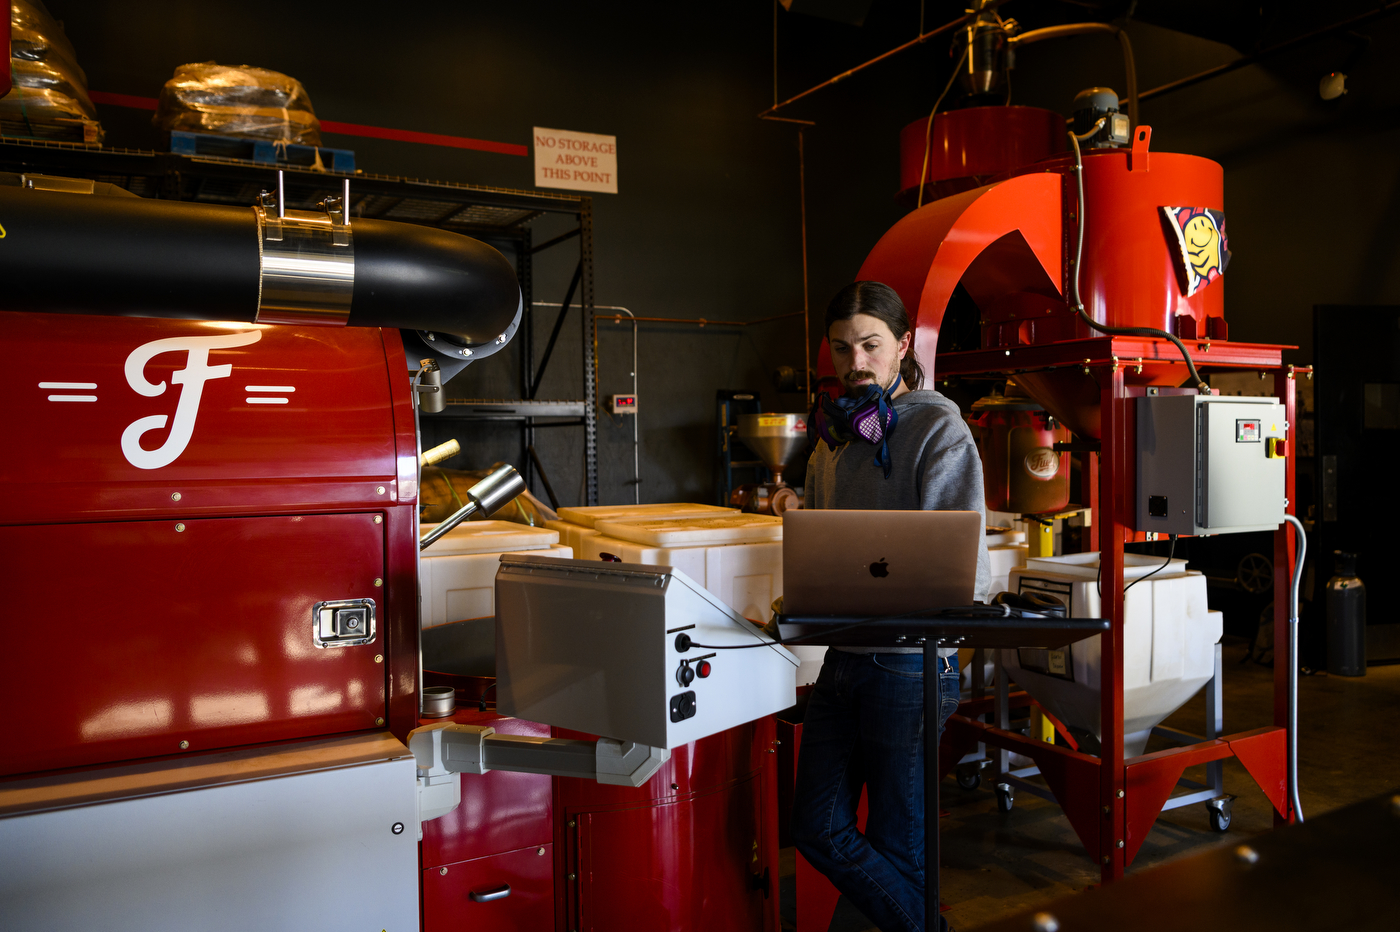 An employee glances at a laptop screen while operating a large red coffee-making machine within Fuel America.